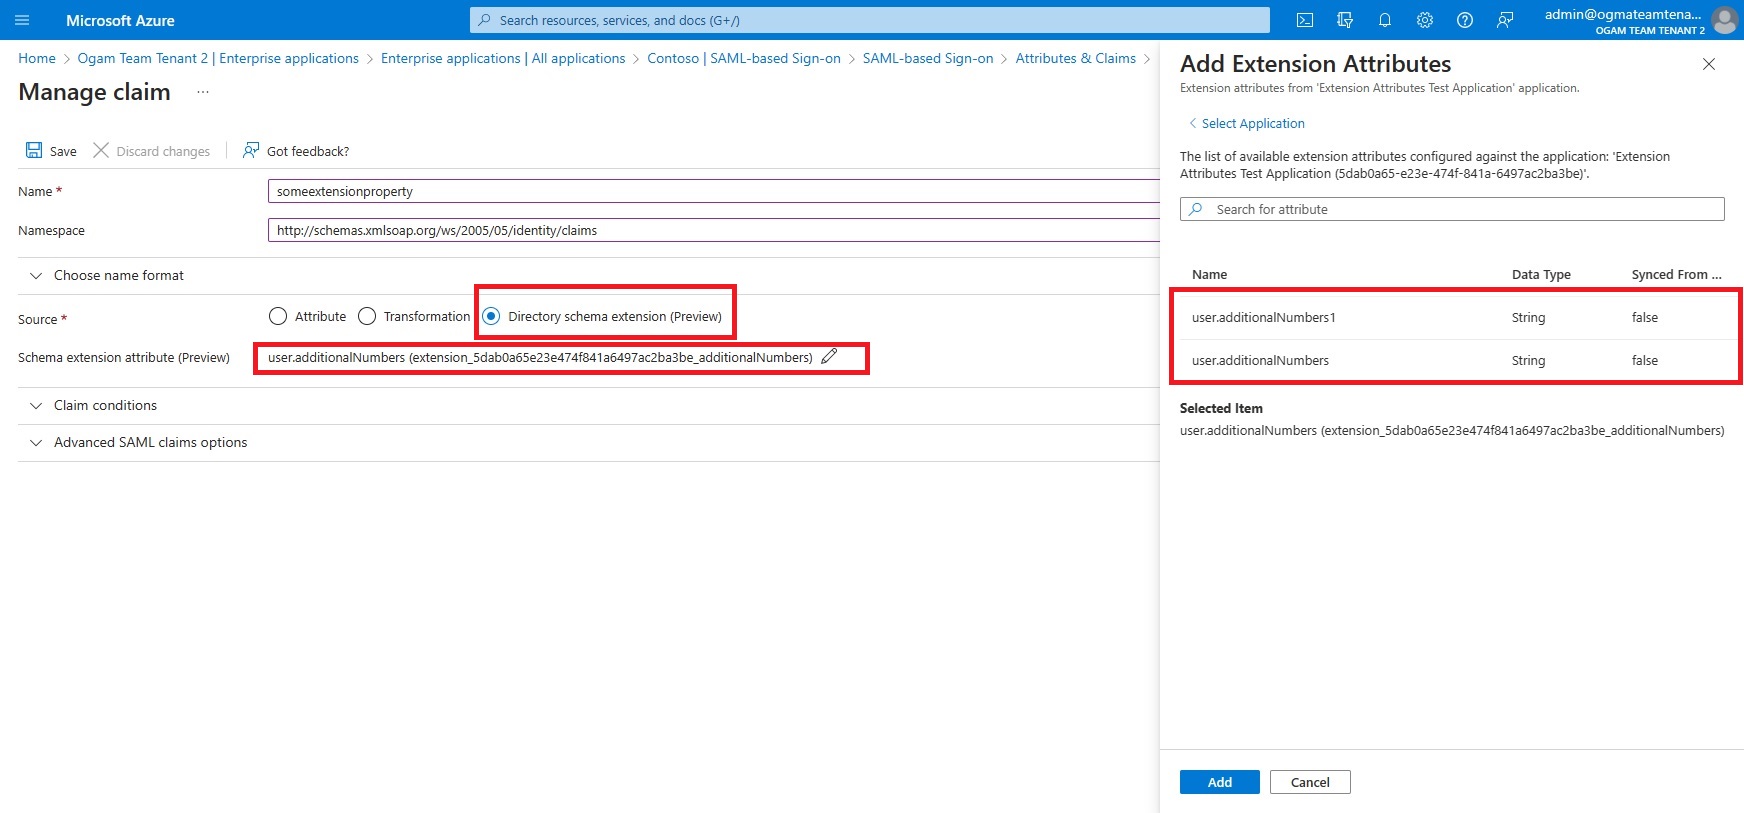 Screenshot of the source application selection in MultiValue extension configuration section in the Azure portal.